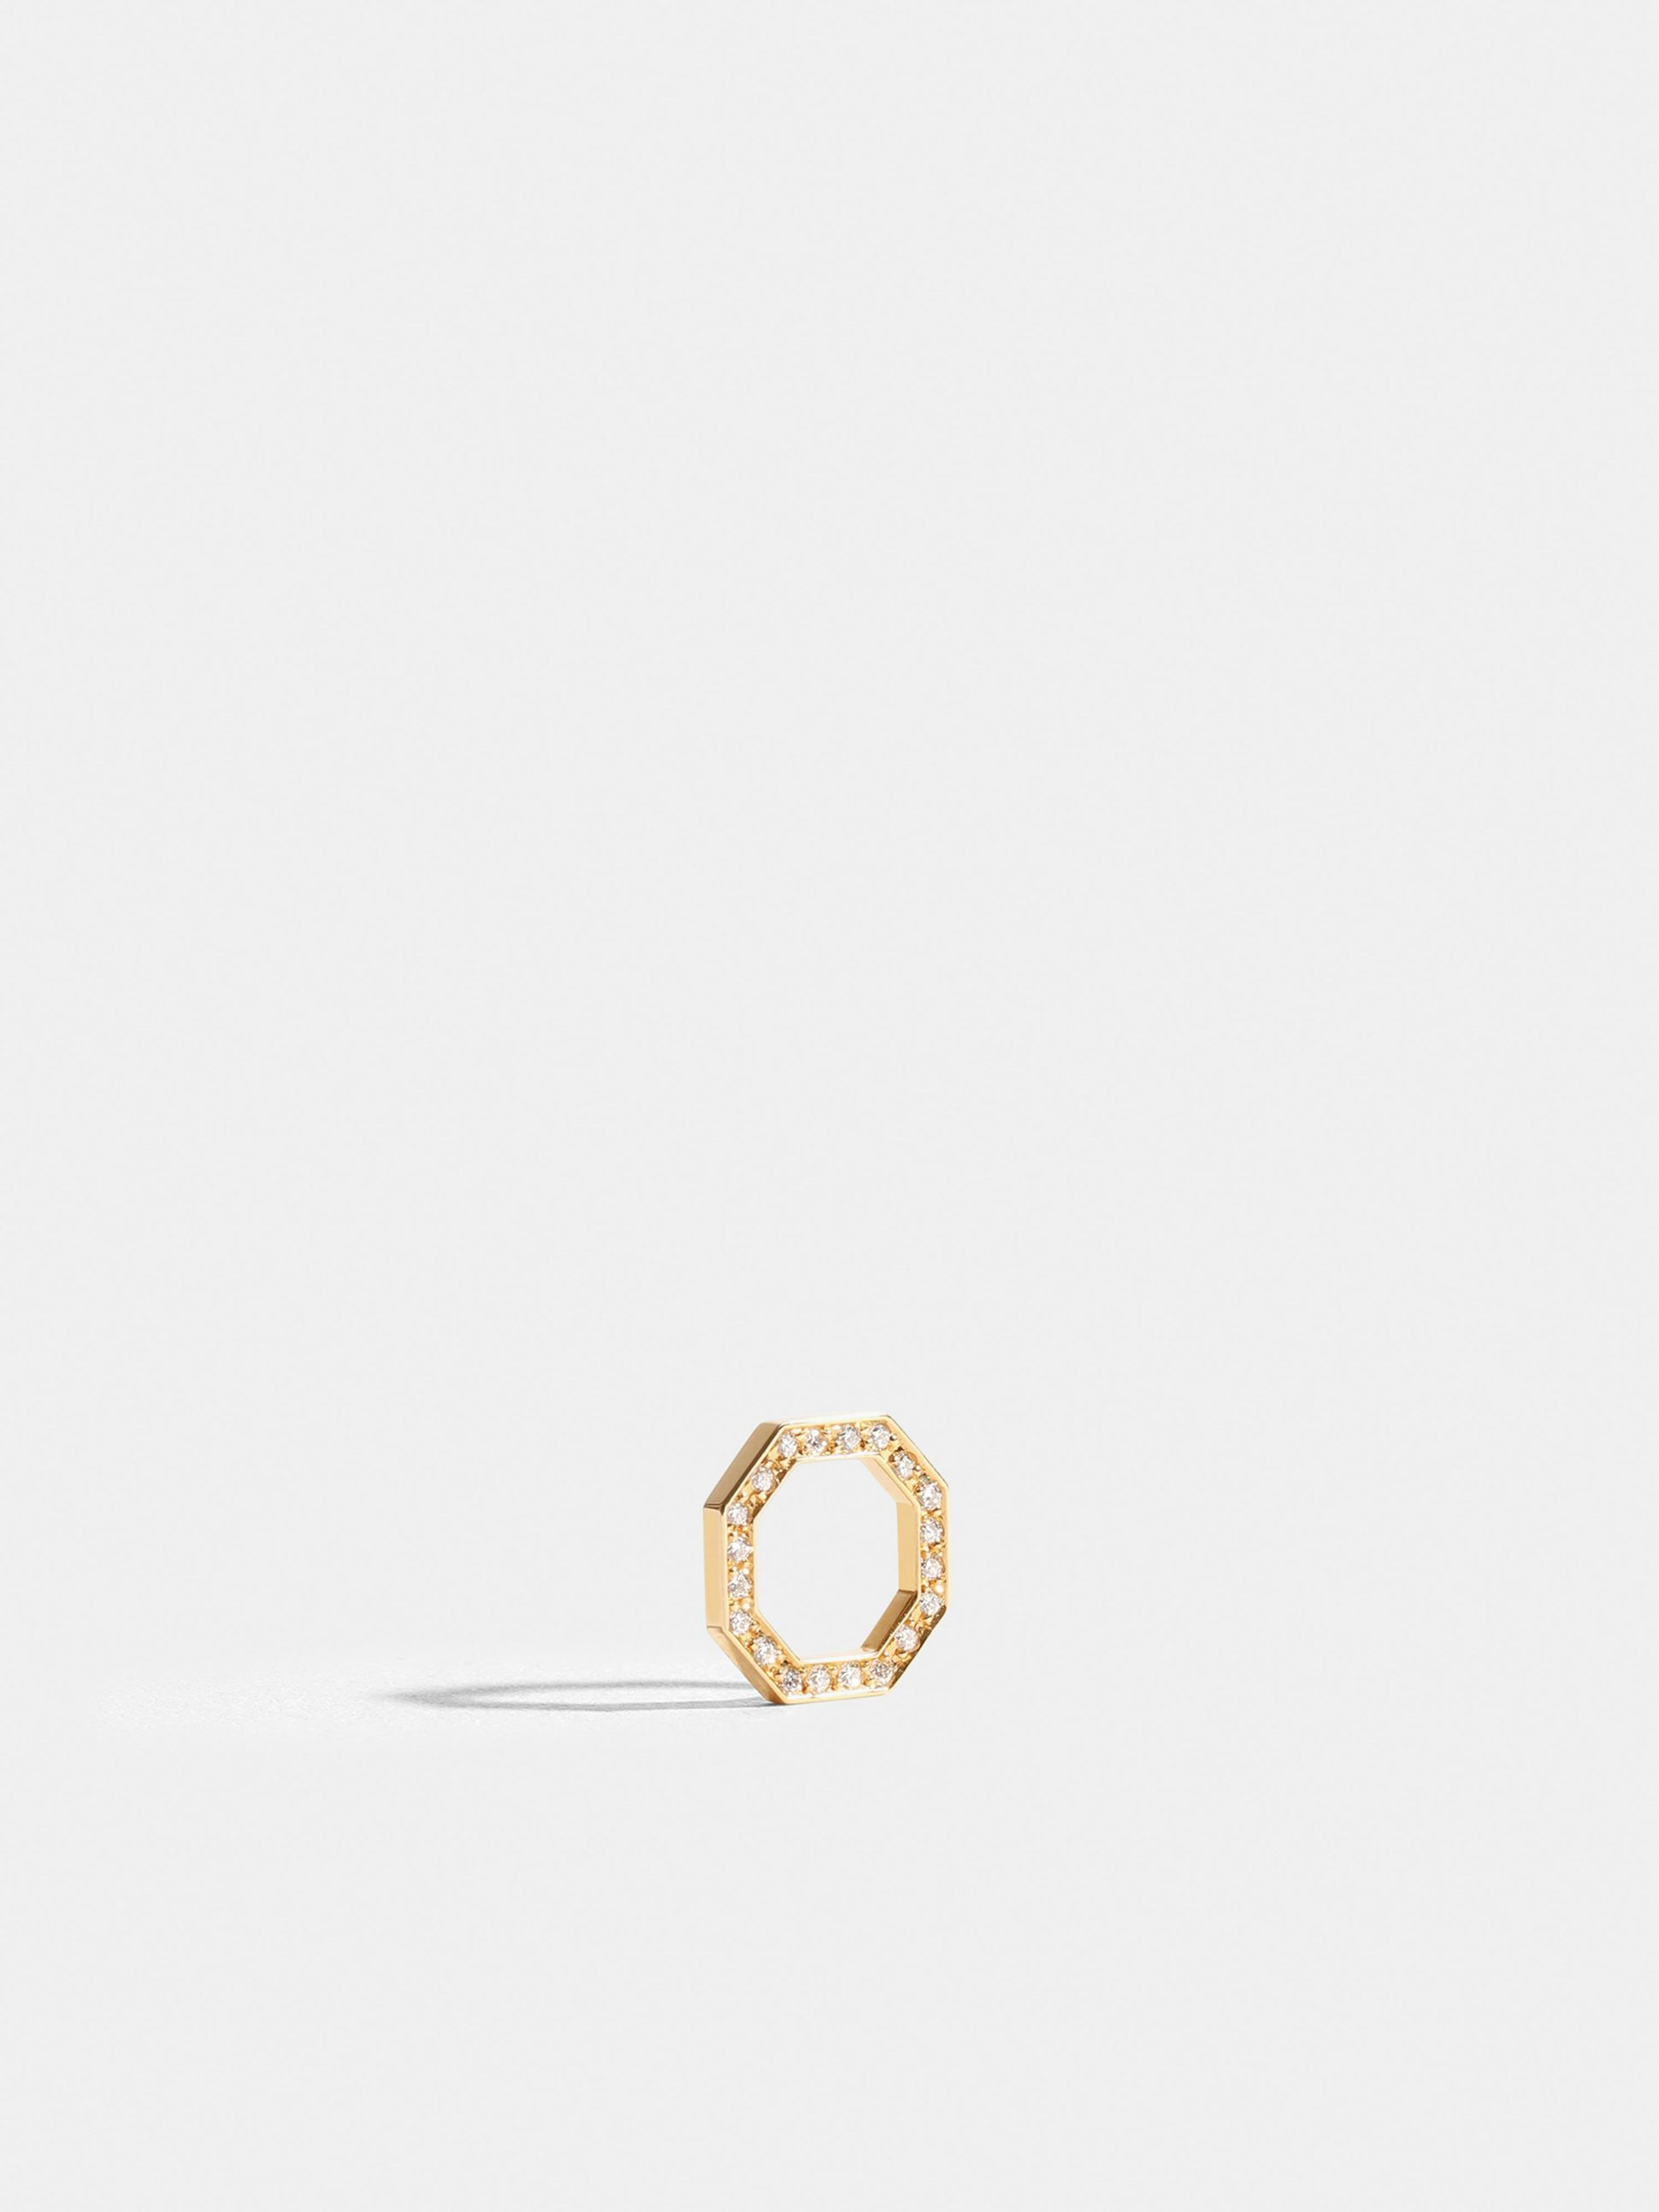 Octogone motif in 18k Fairmined ethical yellow gold, paved with lab-grown diamonds, on a klein blue cord.